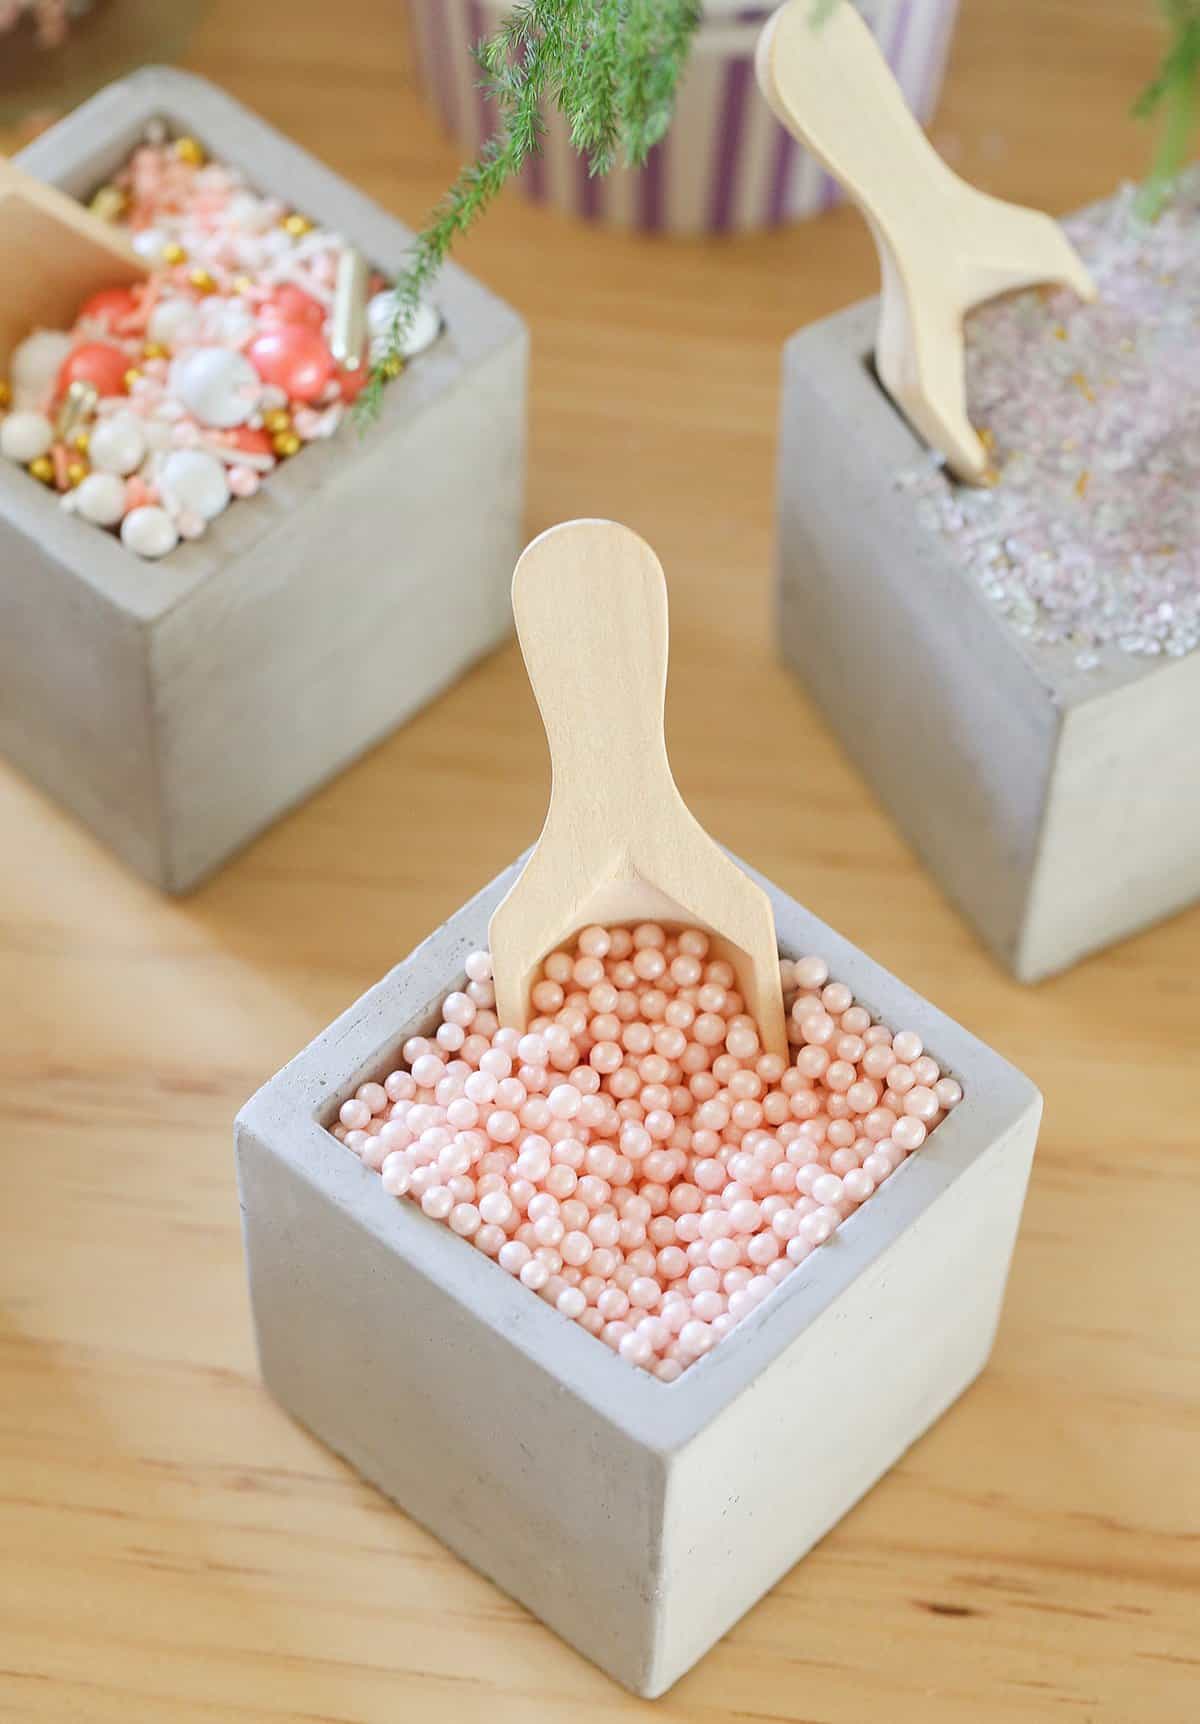 Fancy sprinkles in bowls with a small wooden scooper.